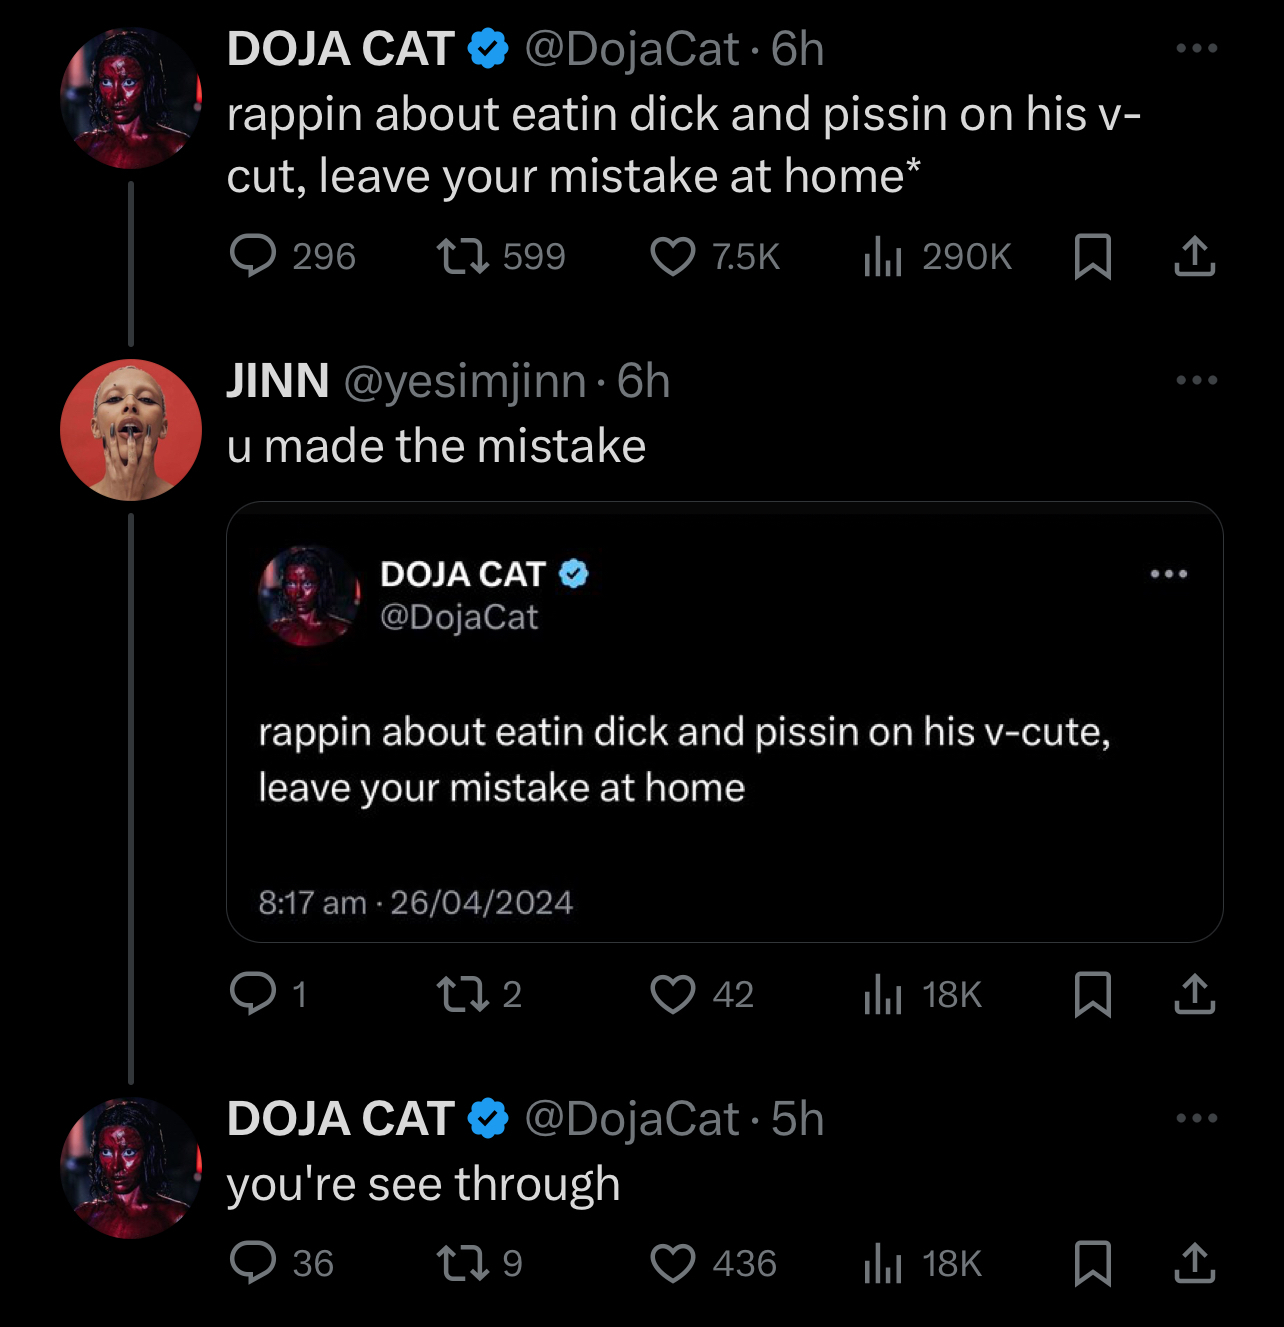 A series of tweets by Doja Cat with text expressing displeasure